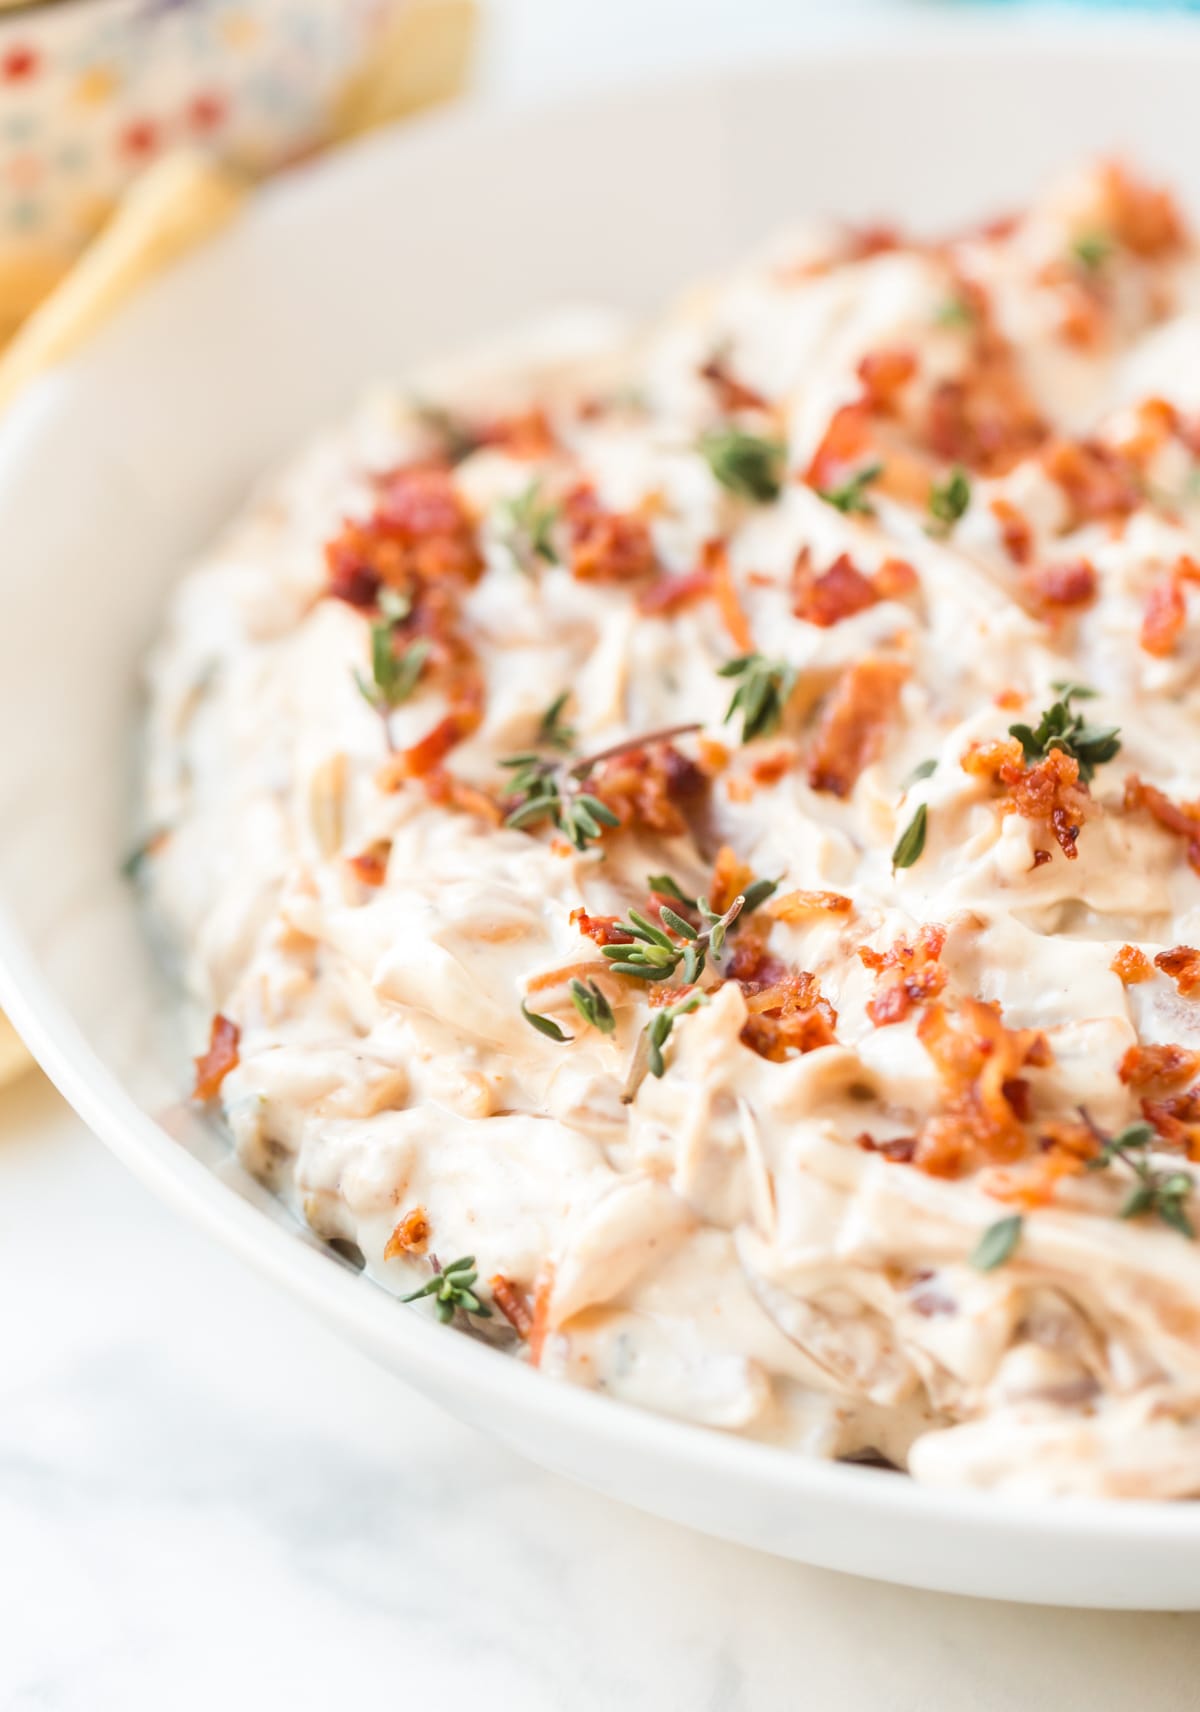 Creamy Hot Caramelized Onion Dip with Fried Onions Recipe #ASpicyPerspective #dip #hotdip 